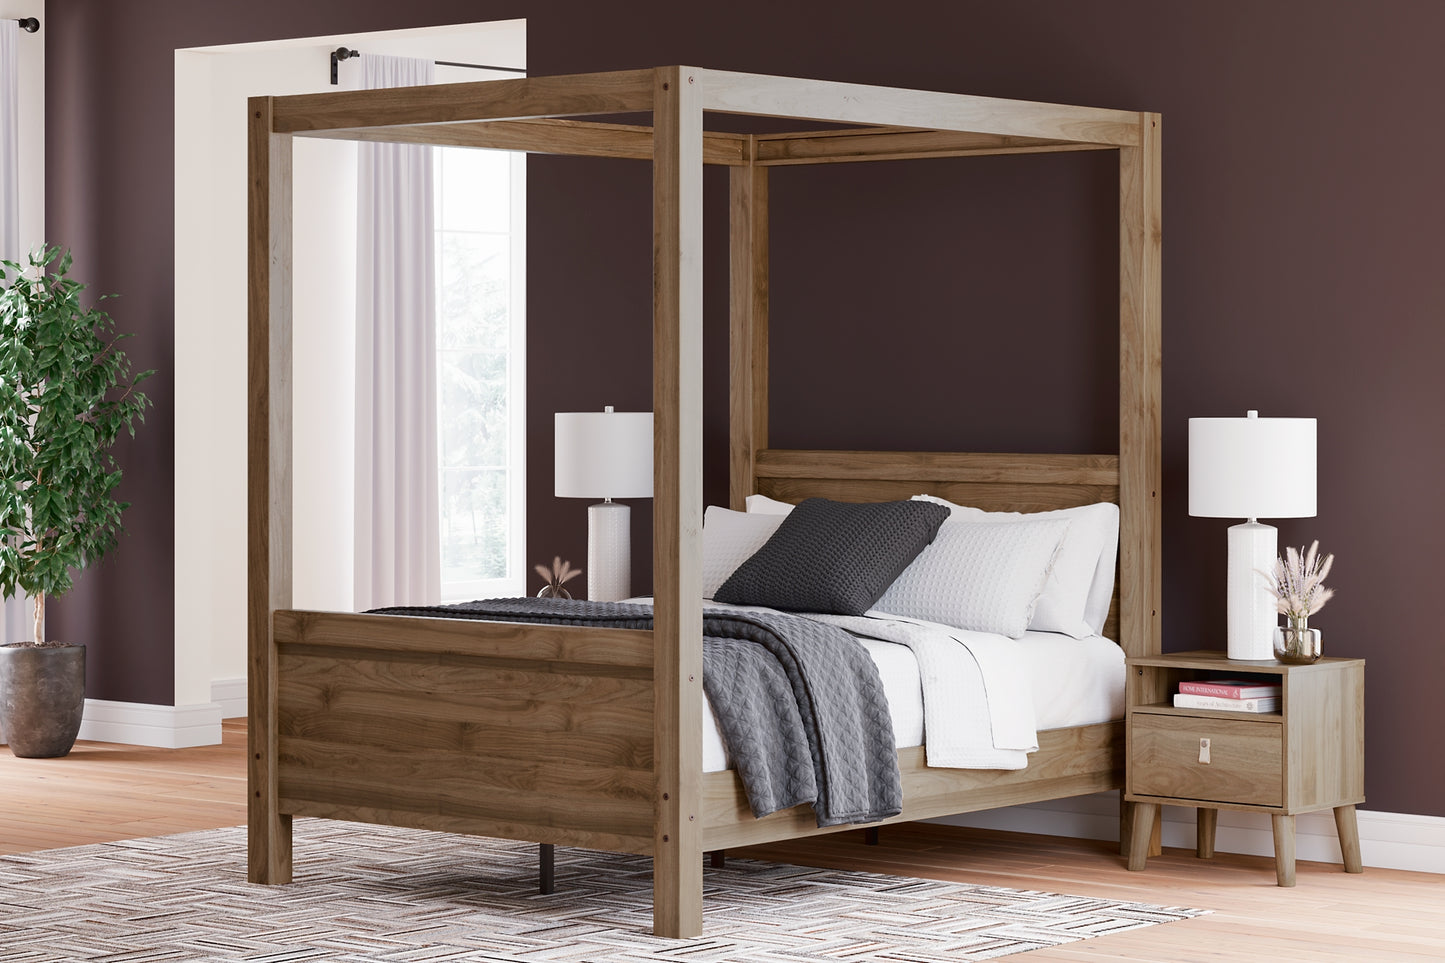 Aprilyn Full Canopy Bed with Dresser, Chest and Nightstand